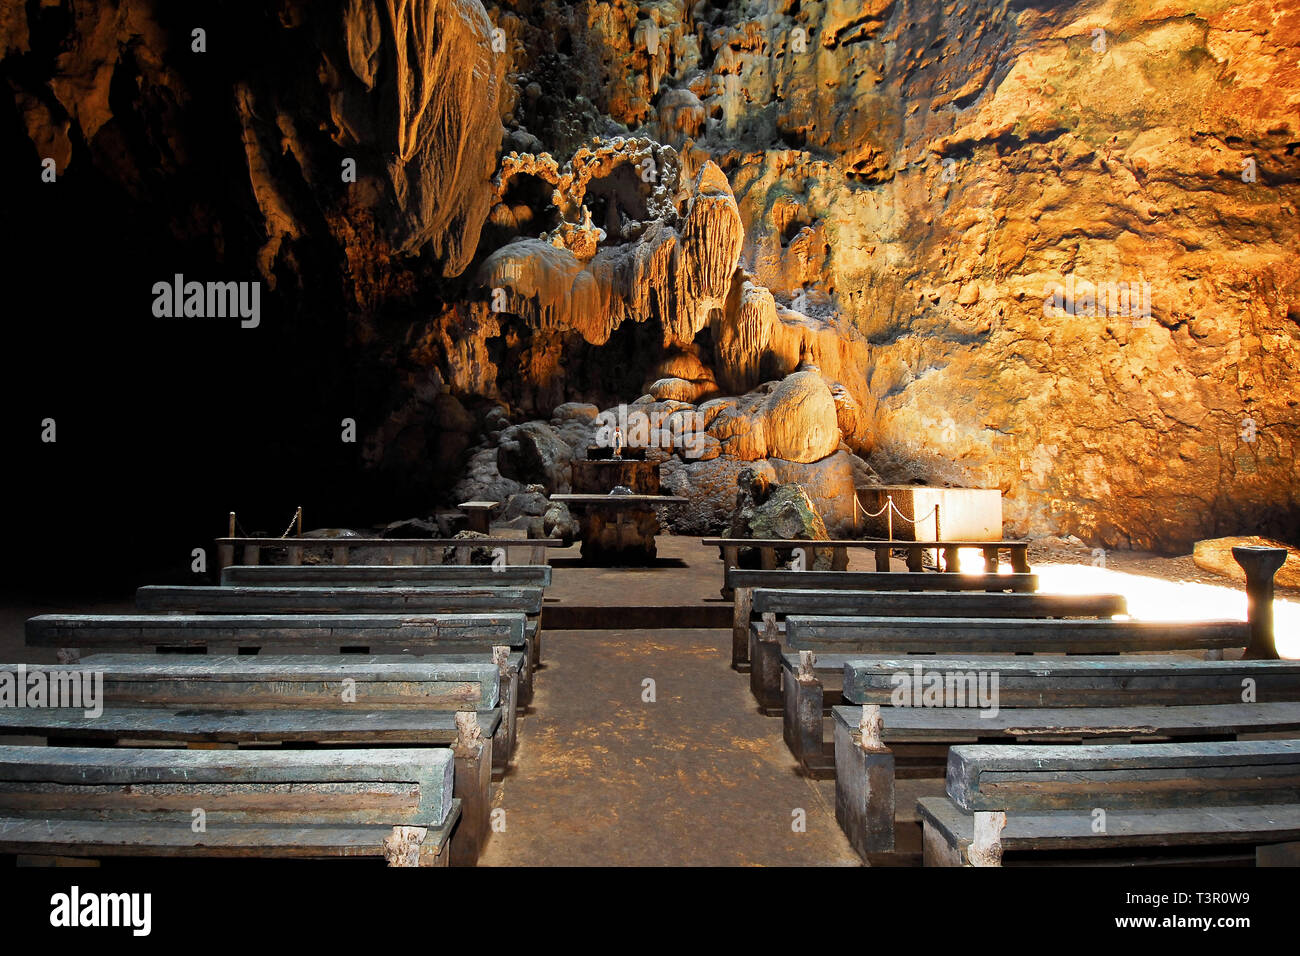 Penablanca, Cagayan Province, Philippines - May 19, 2008: Church built by local people inside the first chamber of the illuminated Callao Cave Stock Photo